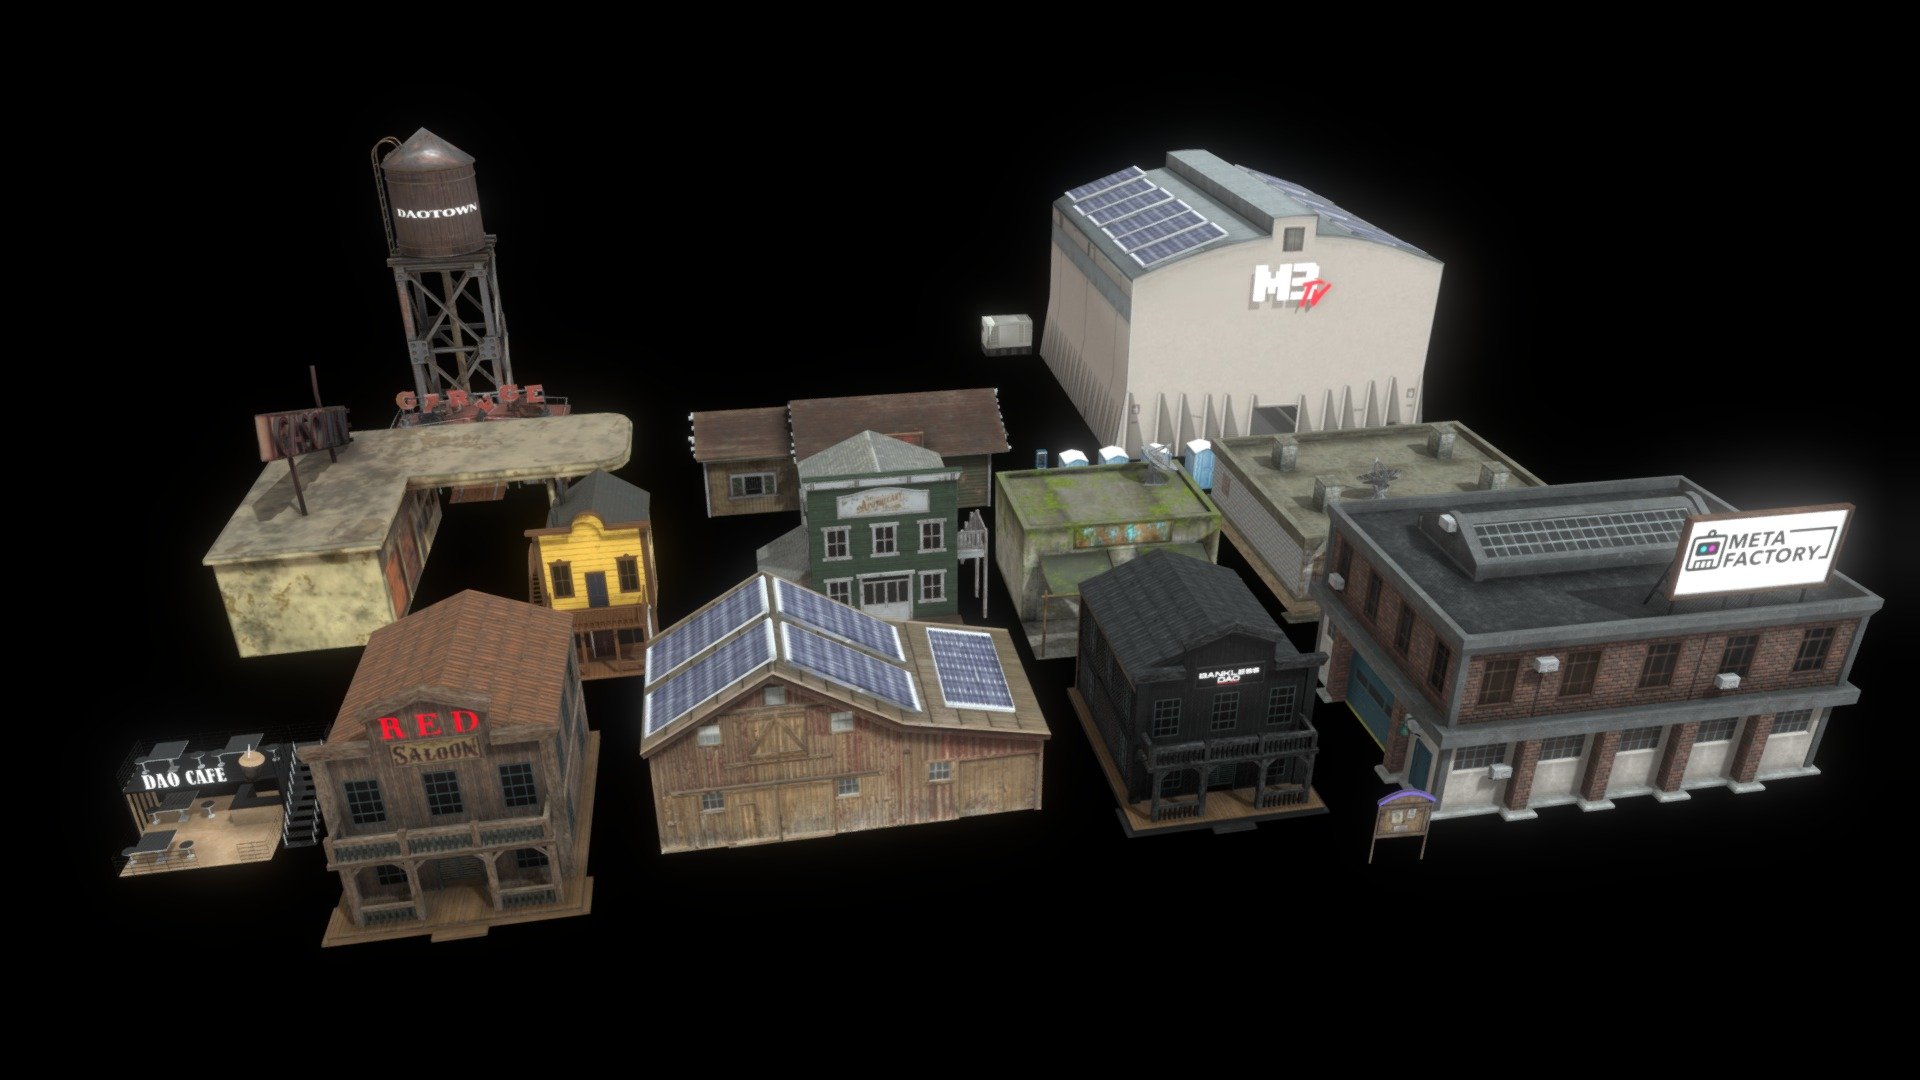 Various buildings used in DAOtown: https://hyperfy.io/daotown

Bankless building, MetaFactory, Red DAO, M3TV, some props

Water tower made by @staticcc - DAOtown Building Kit - Download Free 3D model by m3org 3d model